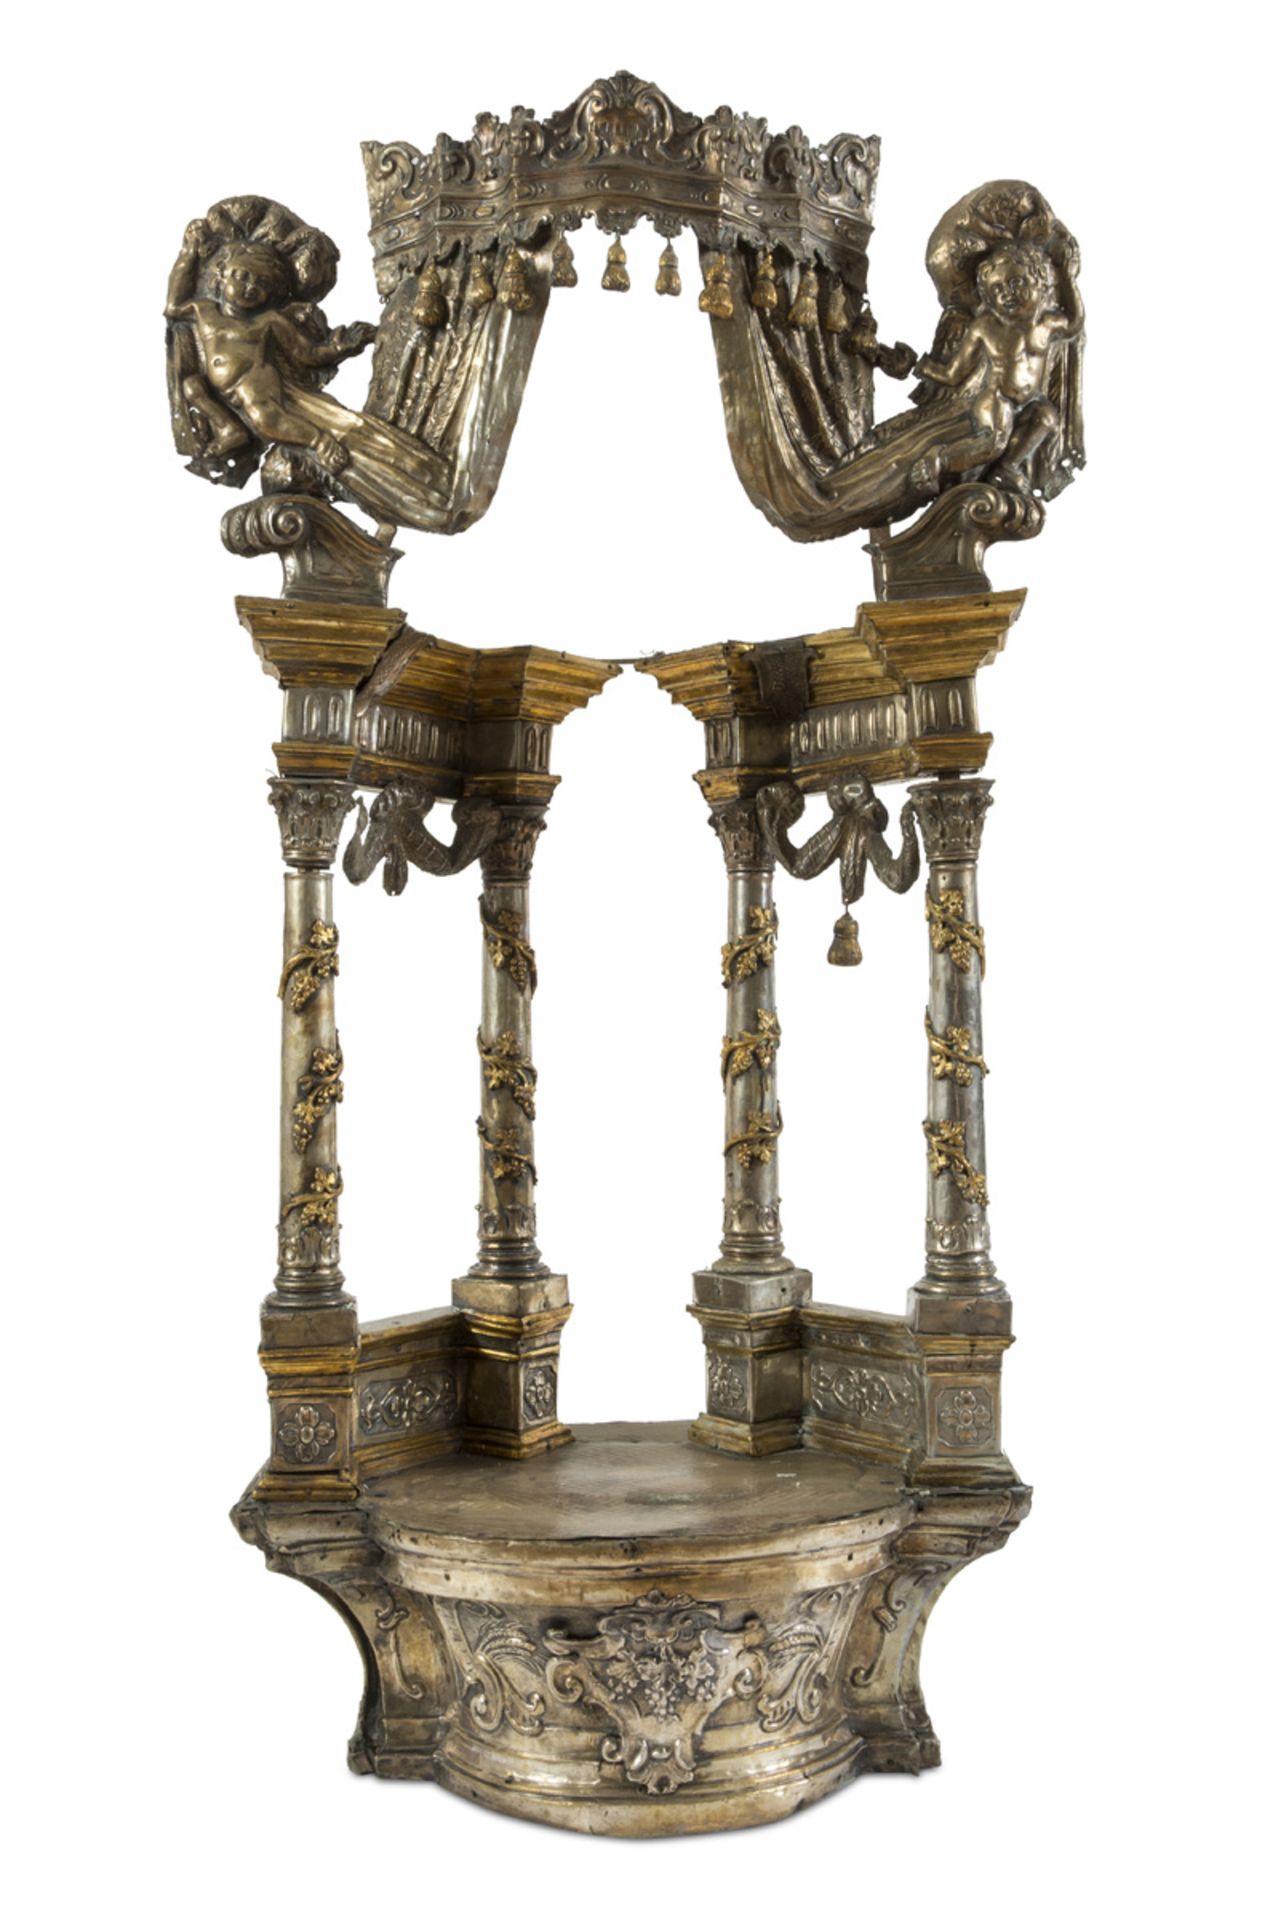 RARE SMALL ALTAR, NAPLES 18TH CENTURY in silver-plated and gilded metal, Tympanum with drapery and